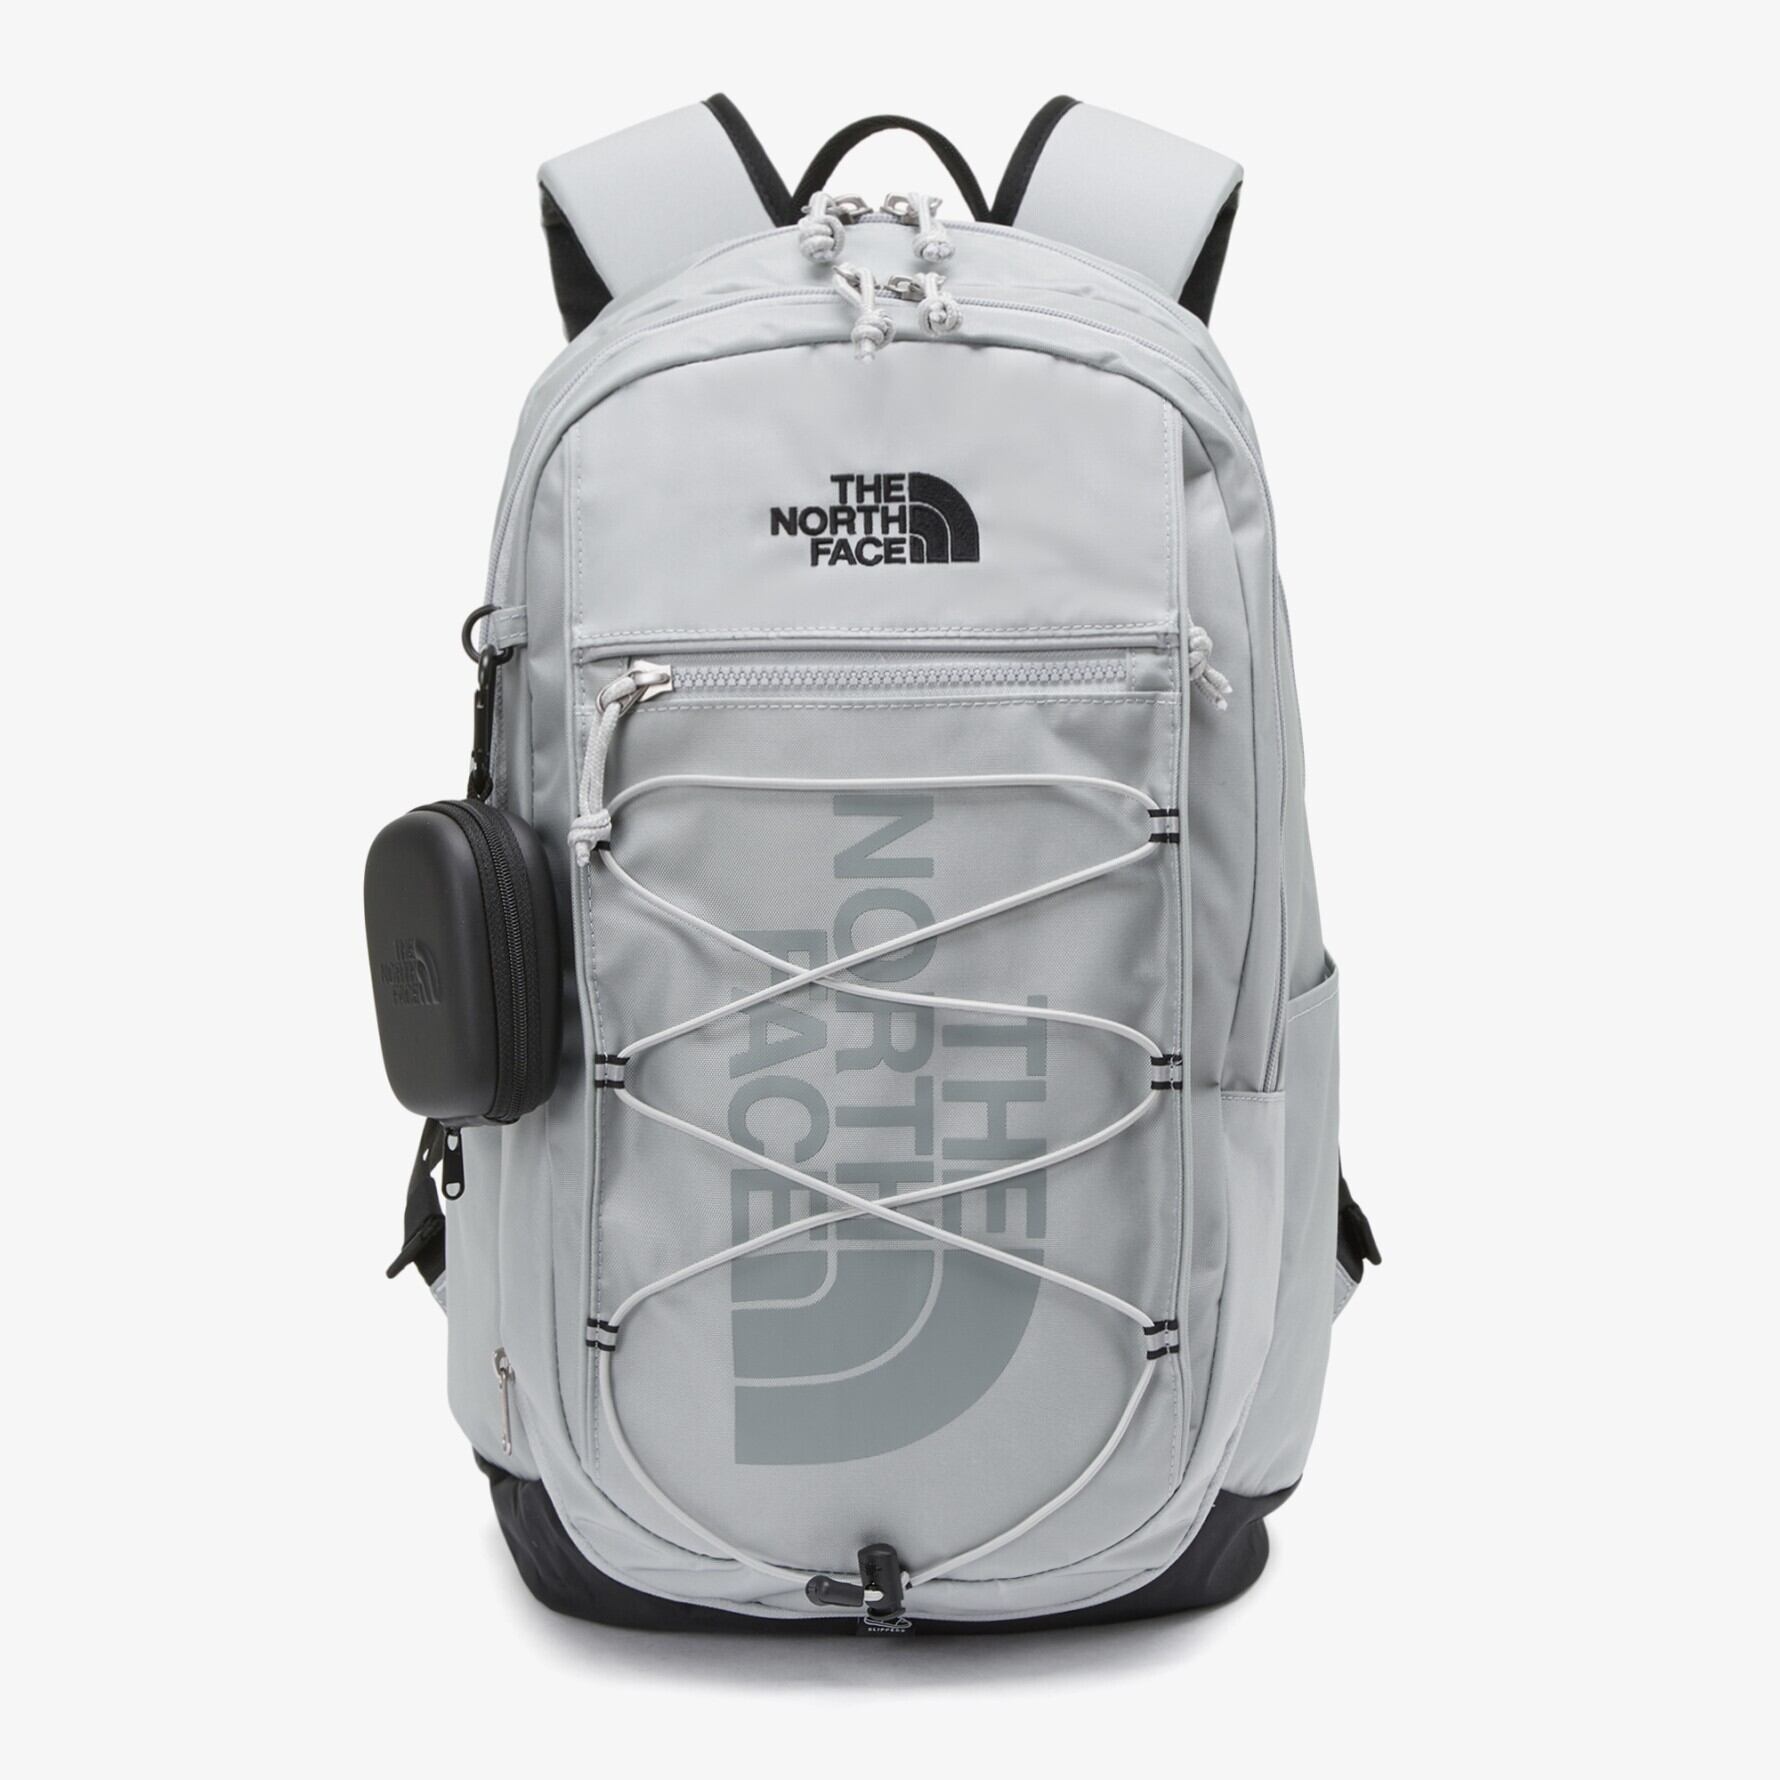 THE NORTH FACE SUPER PACK WMU5964 ノースフェイス バックパック